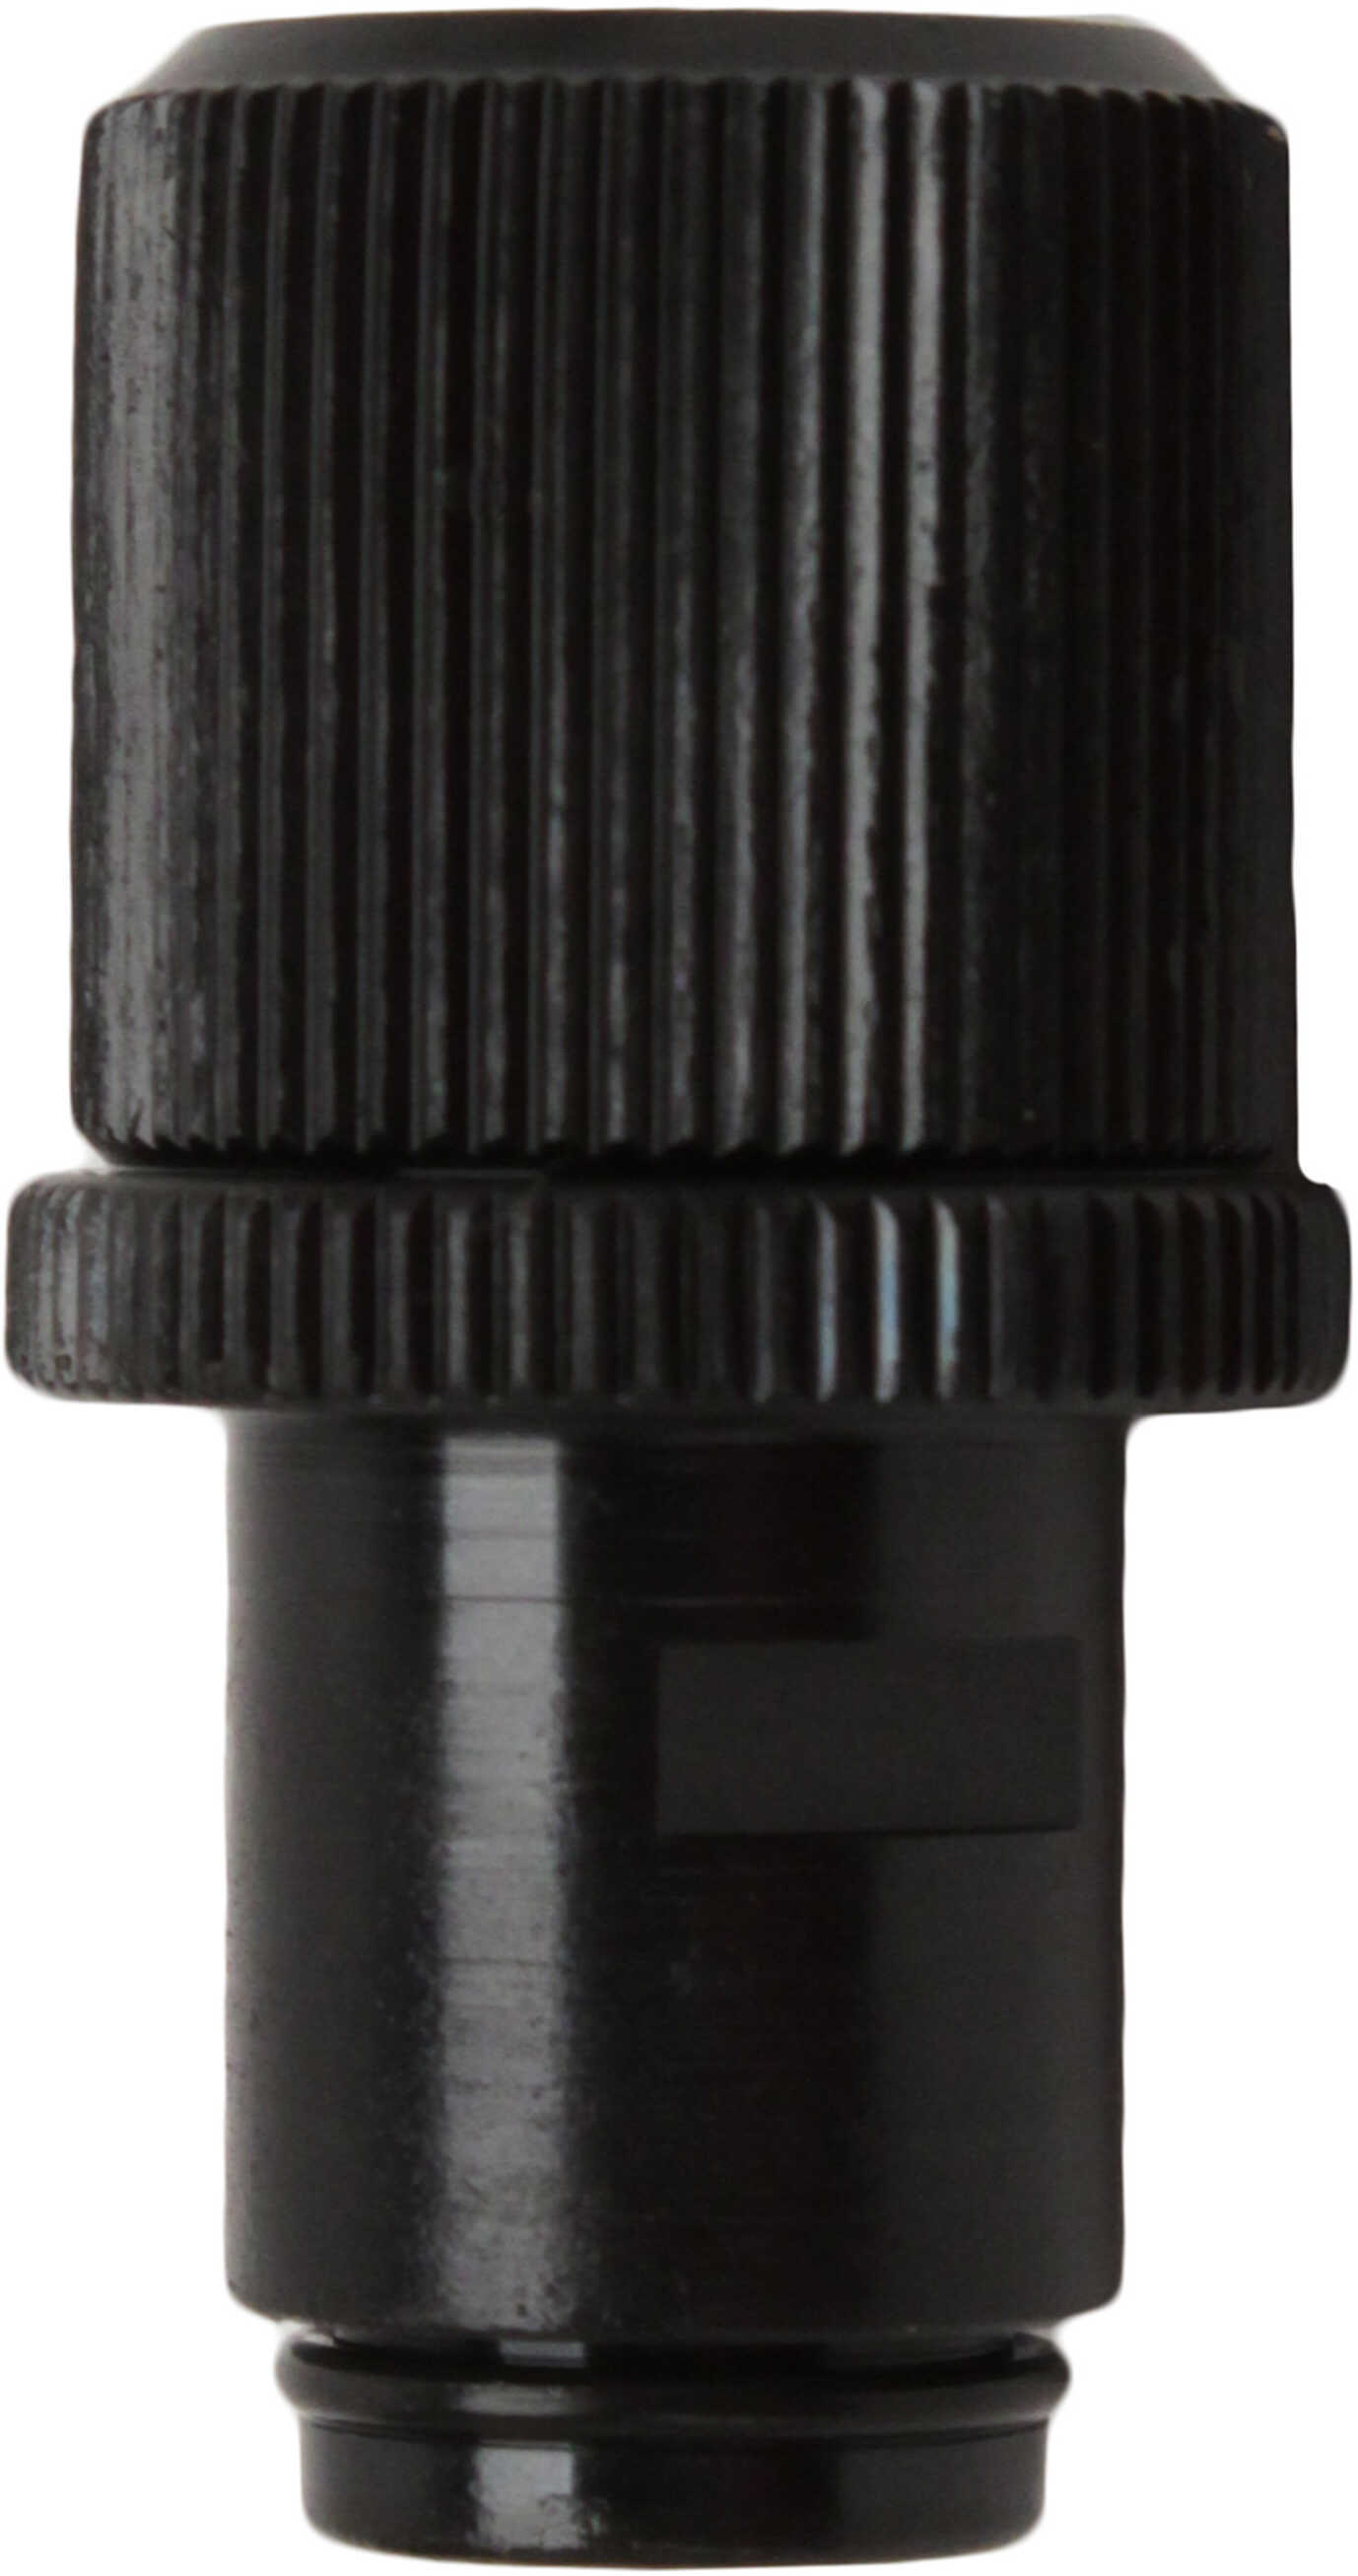 Walther P22 Thrd Bbl Adapter